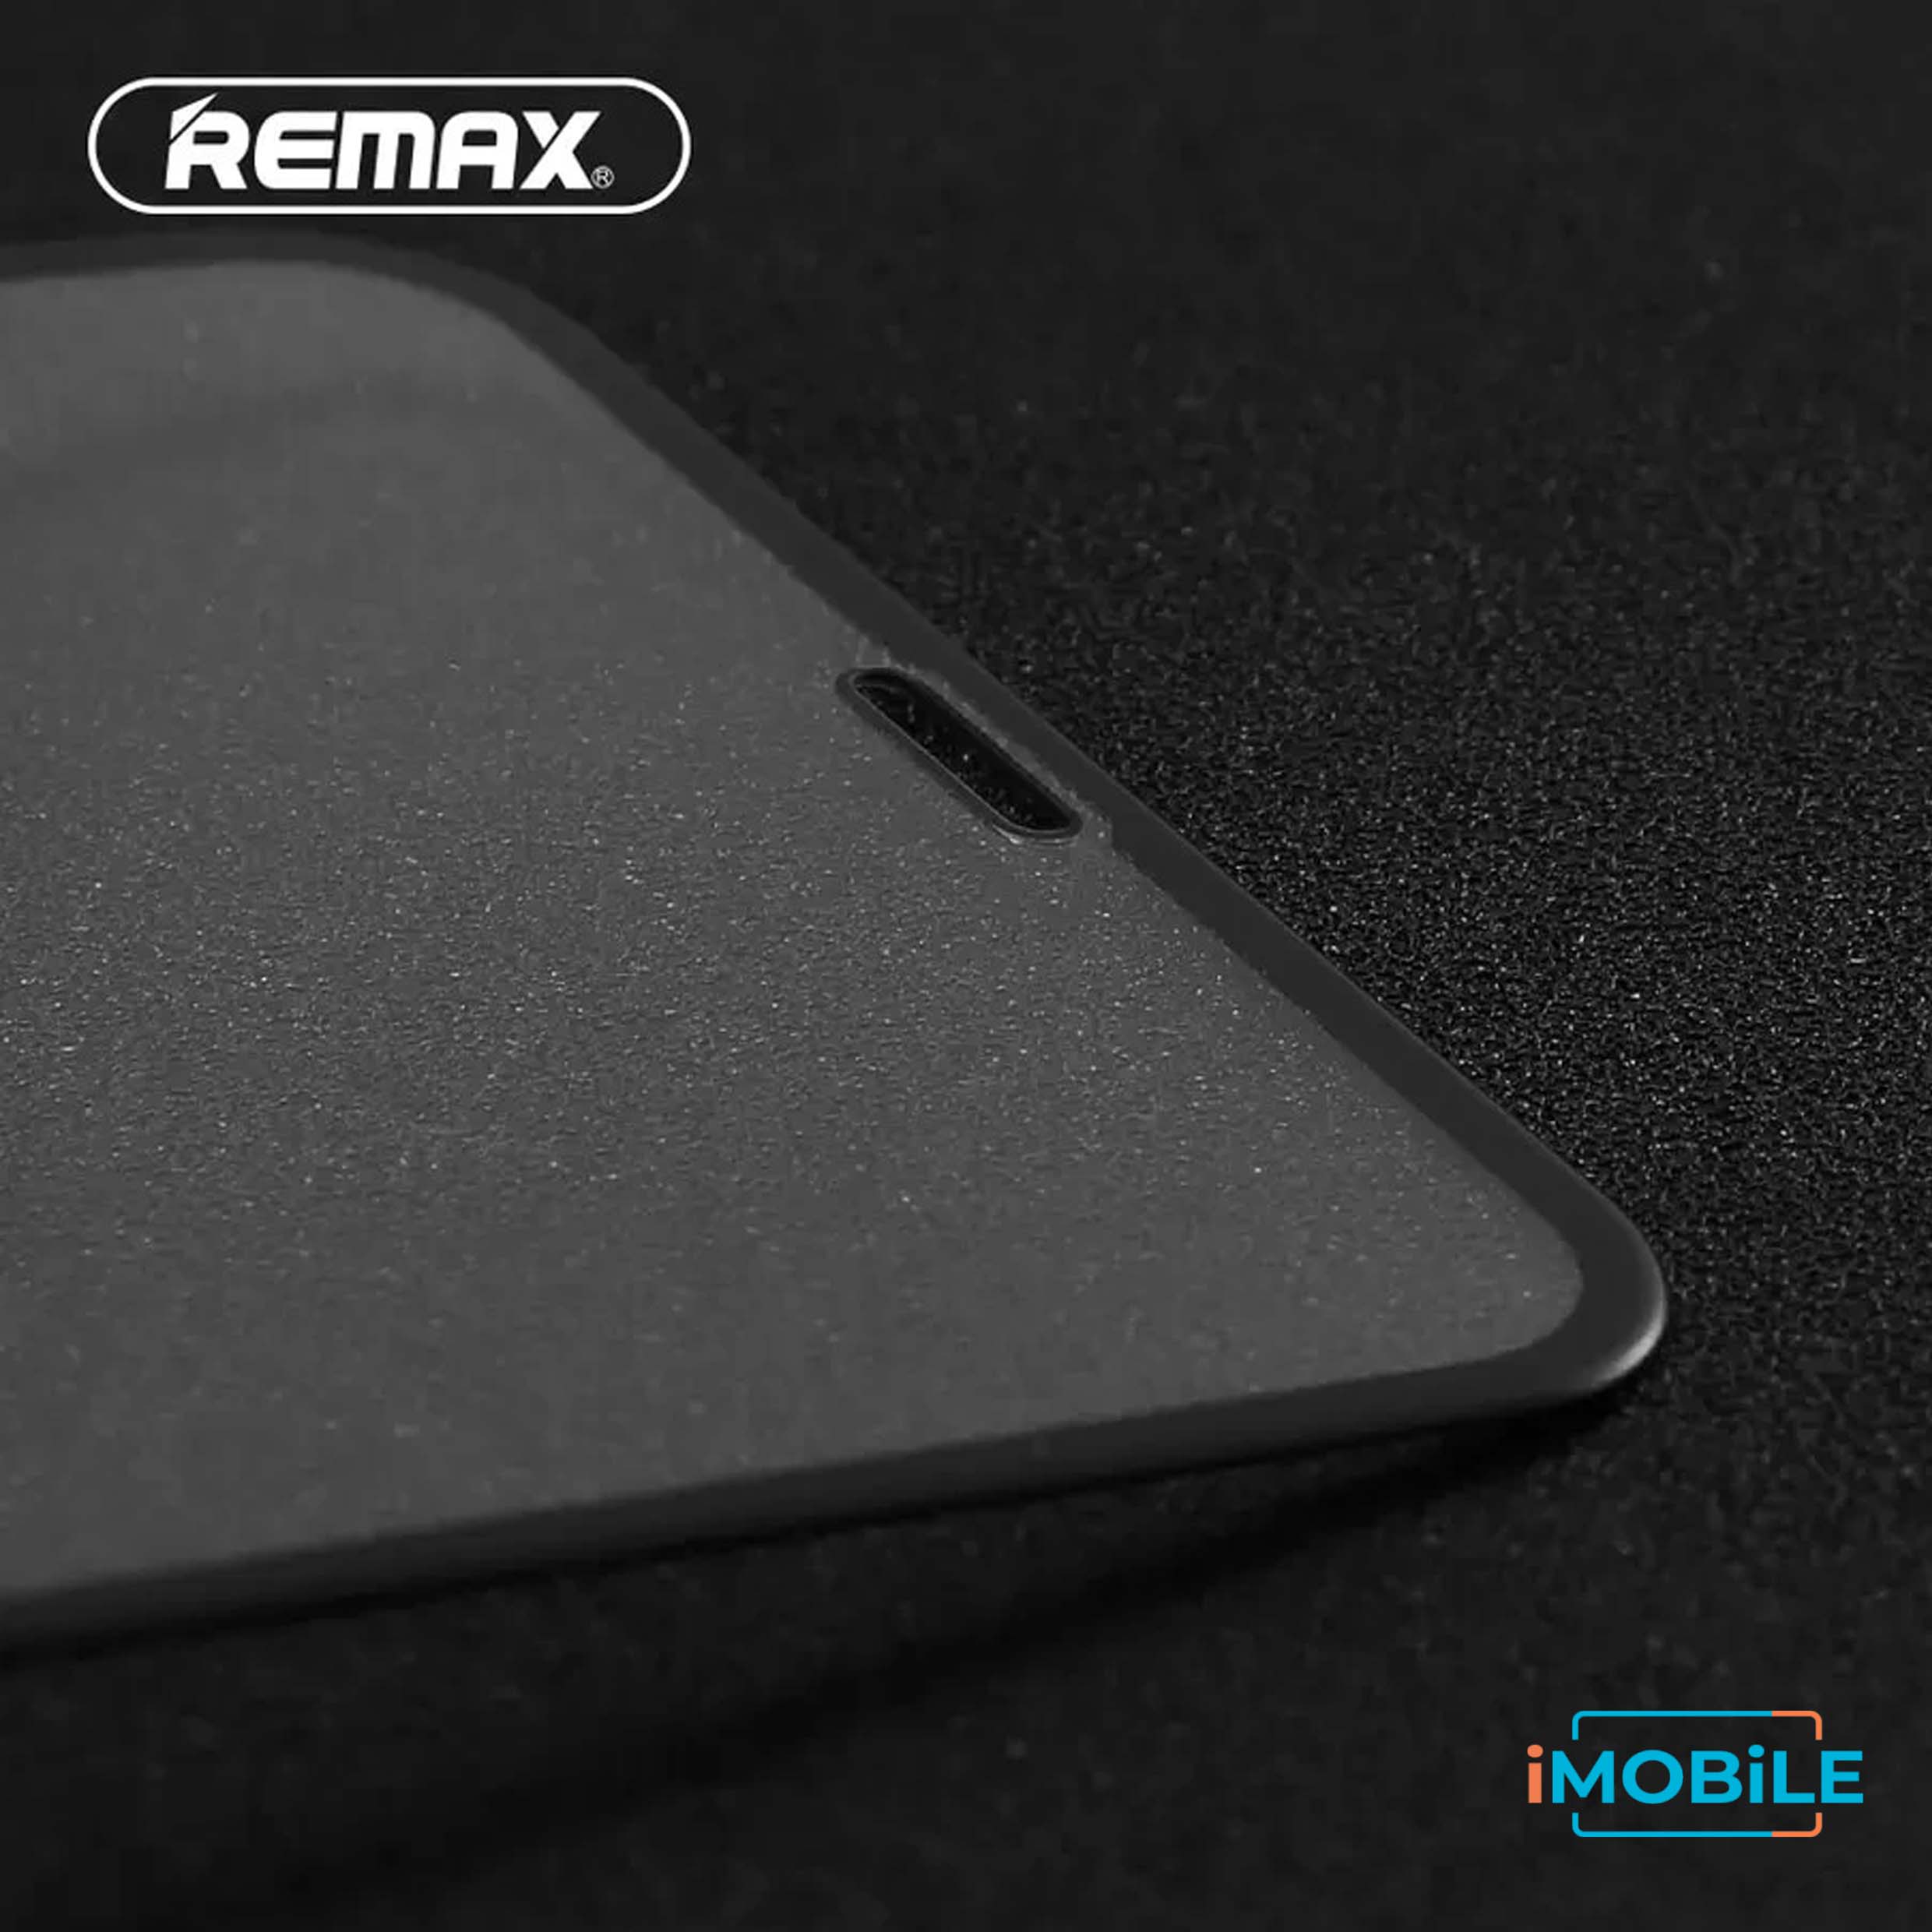 Remax 2.5D Tempered Glass with Envelope Pack, iPhone 12/12 Pro